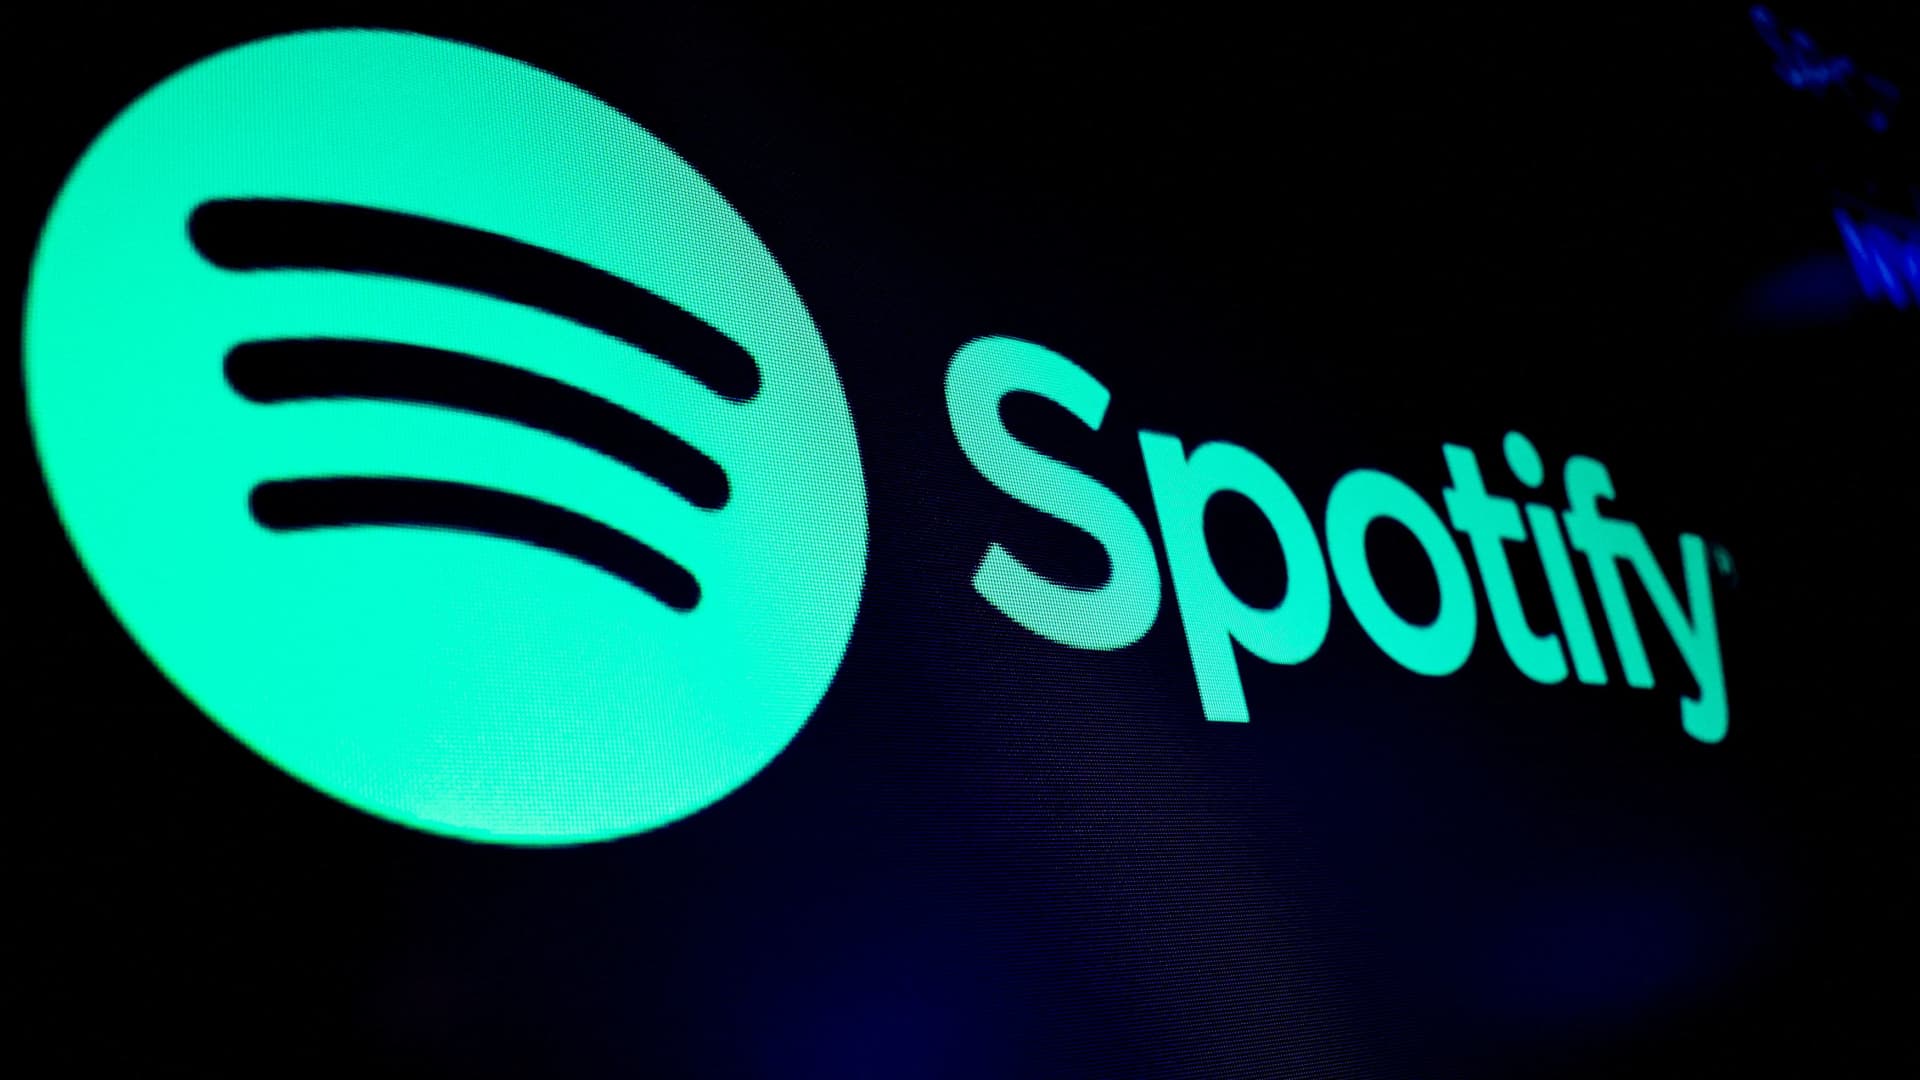 Spotify shares up on report company plans to raise prices